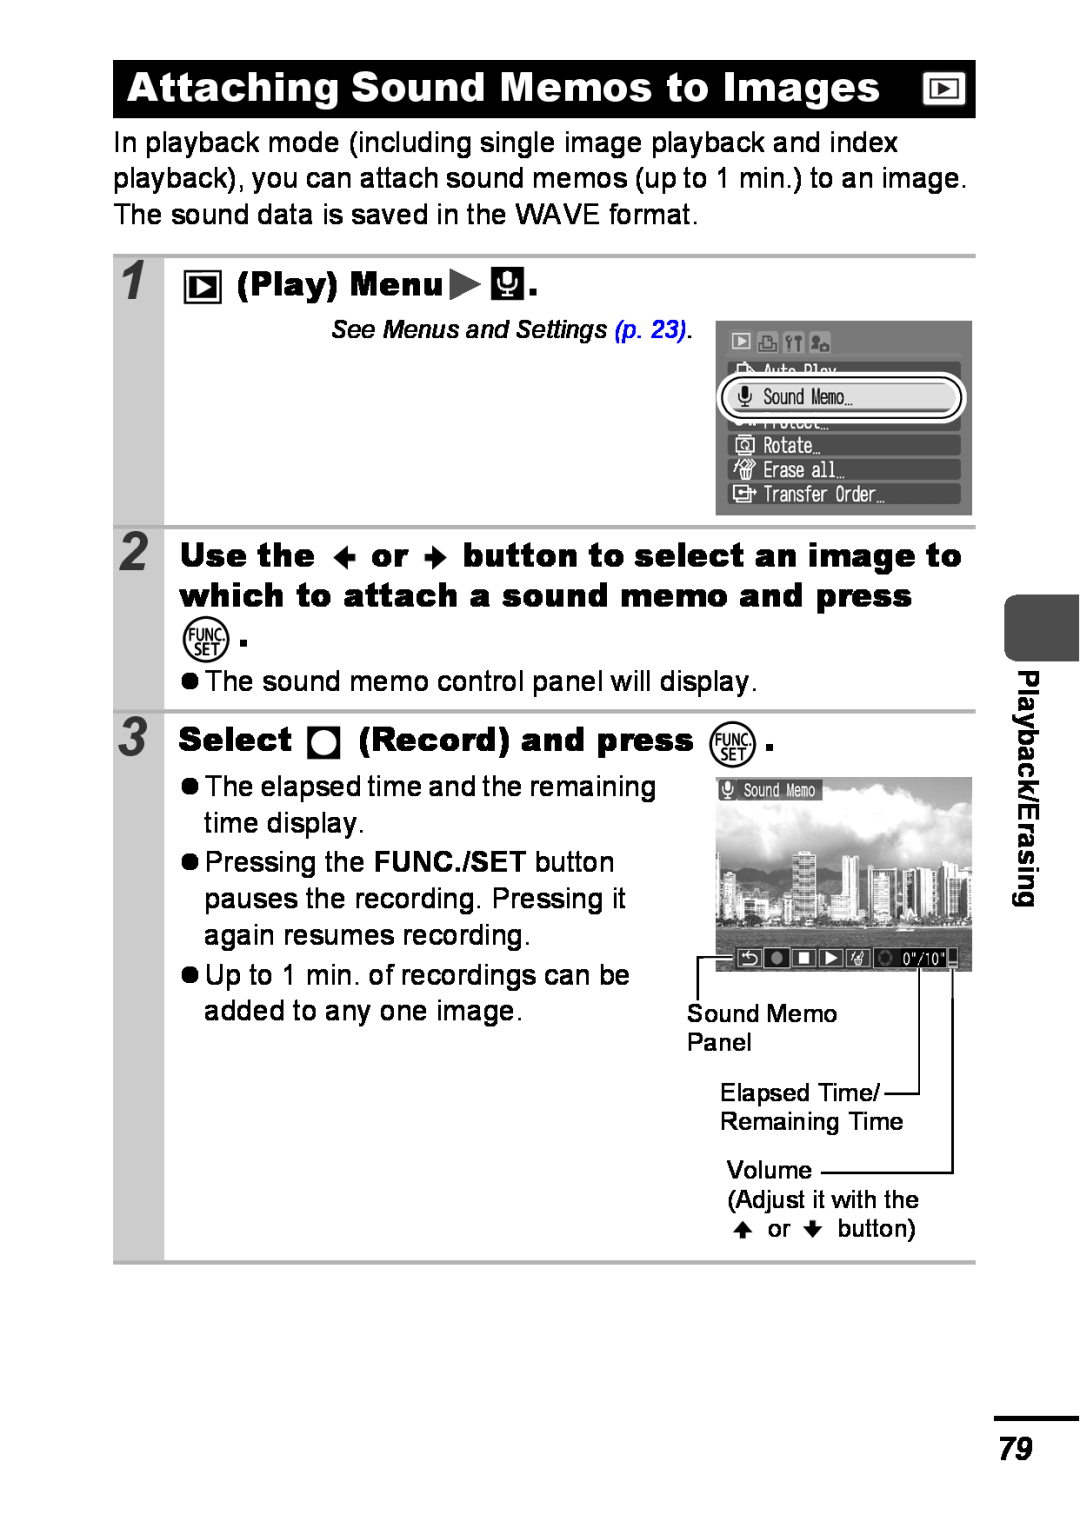 Canon A540 appendix Attaching Sound Memos to Images, Select Record and press, Play Menu, Playback/Erasing 